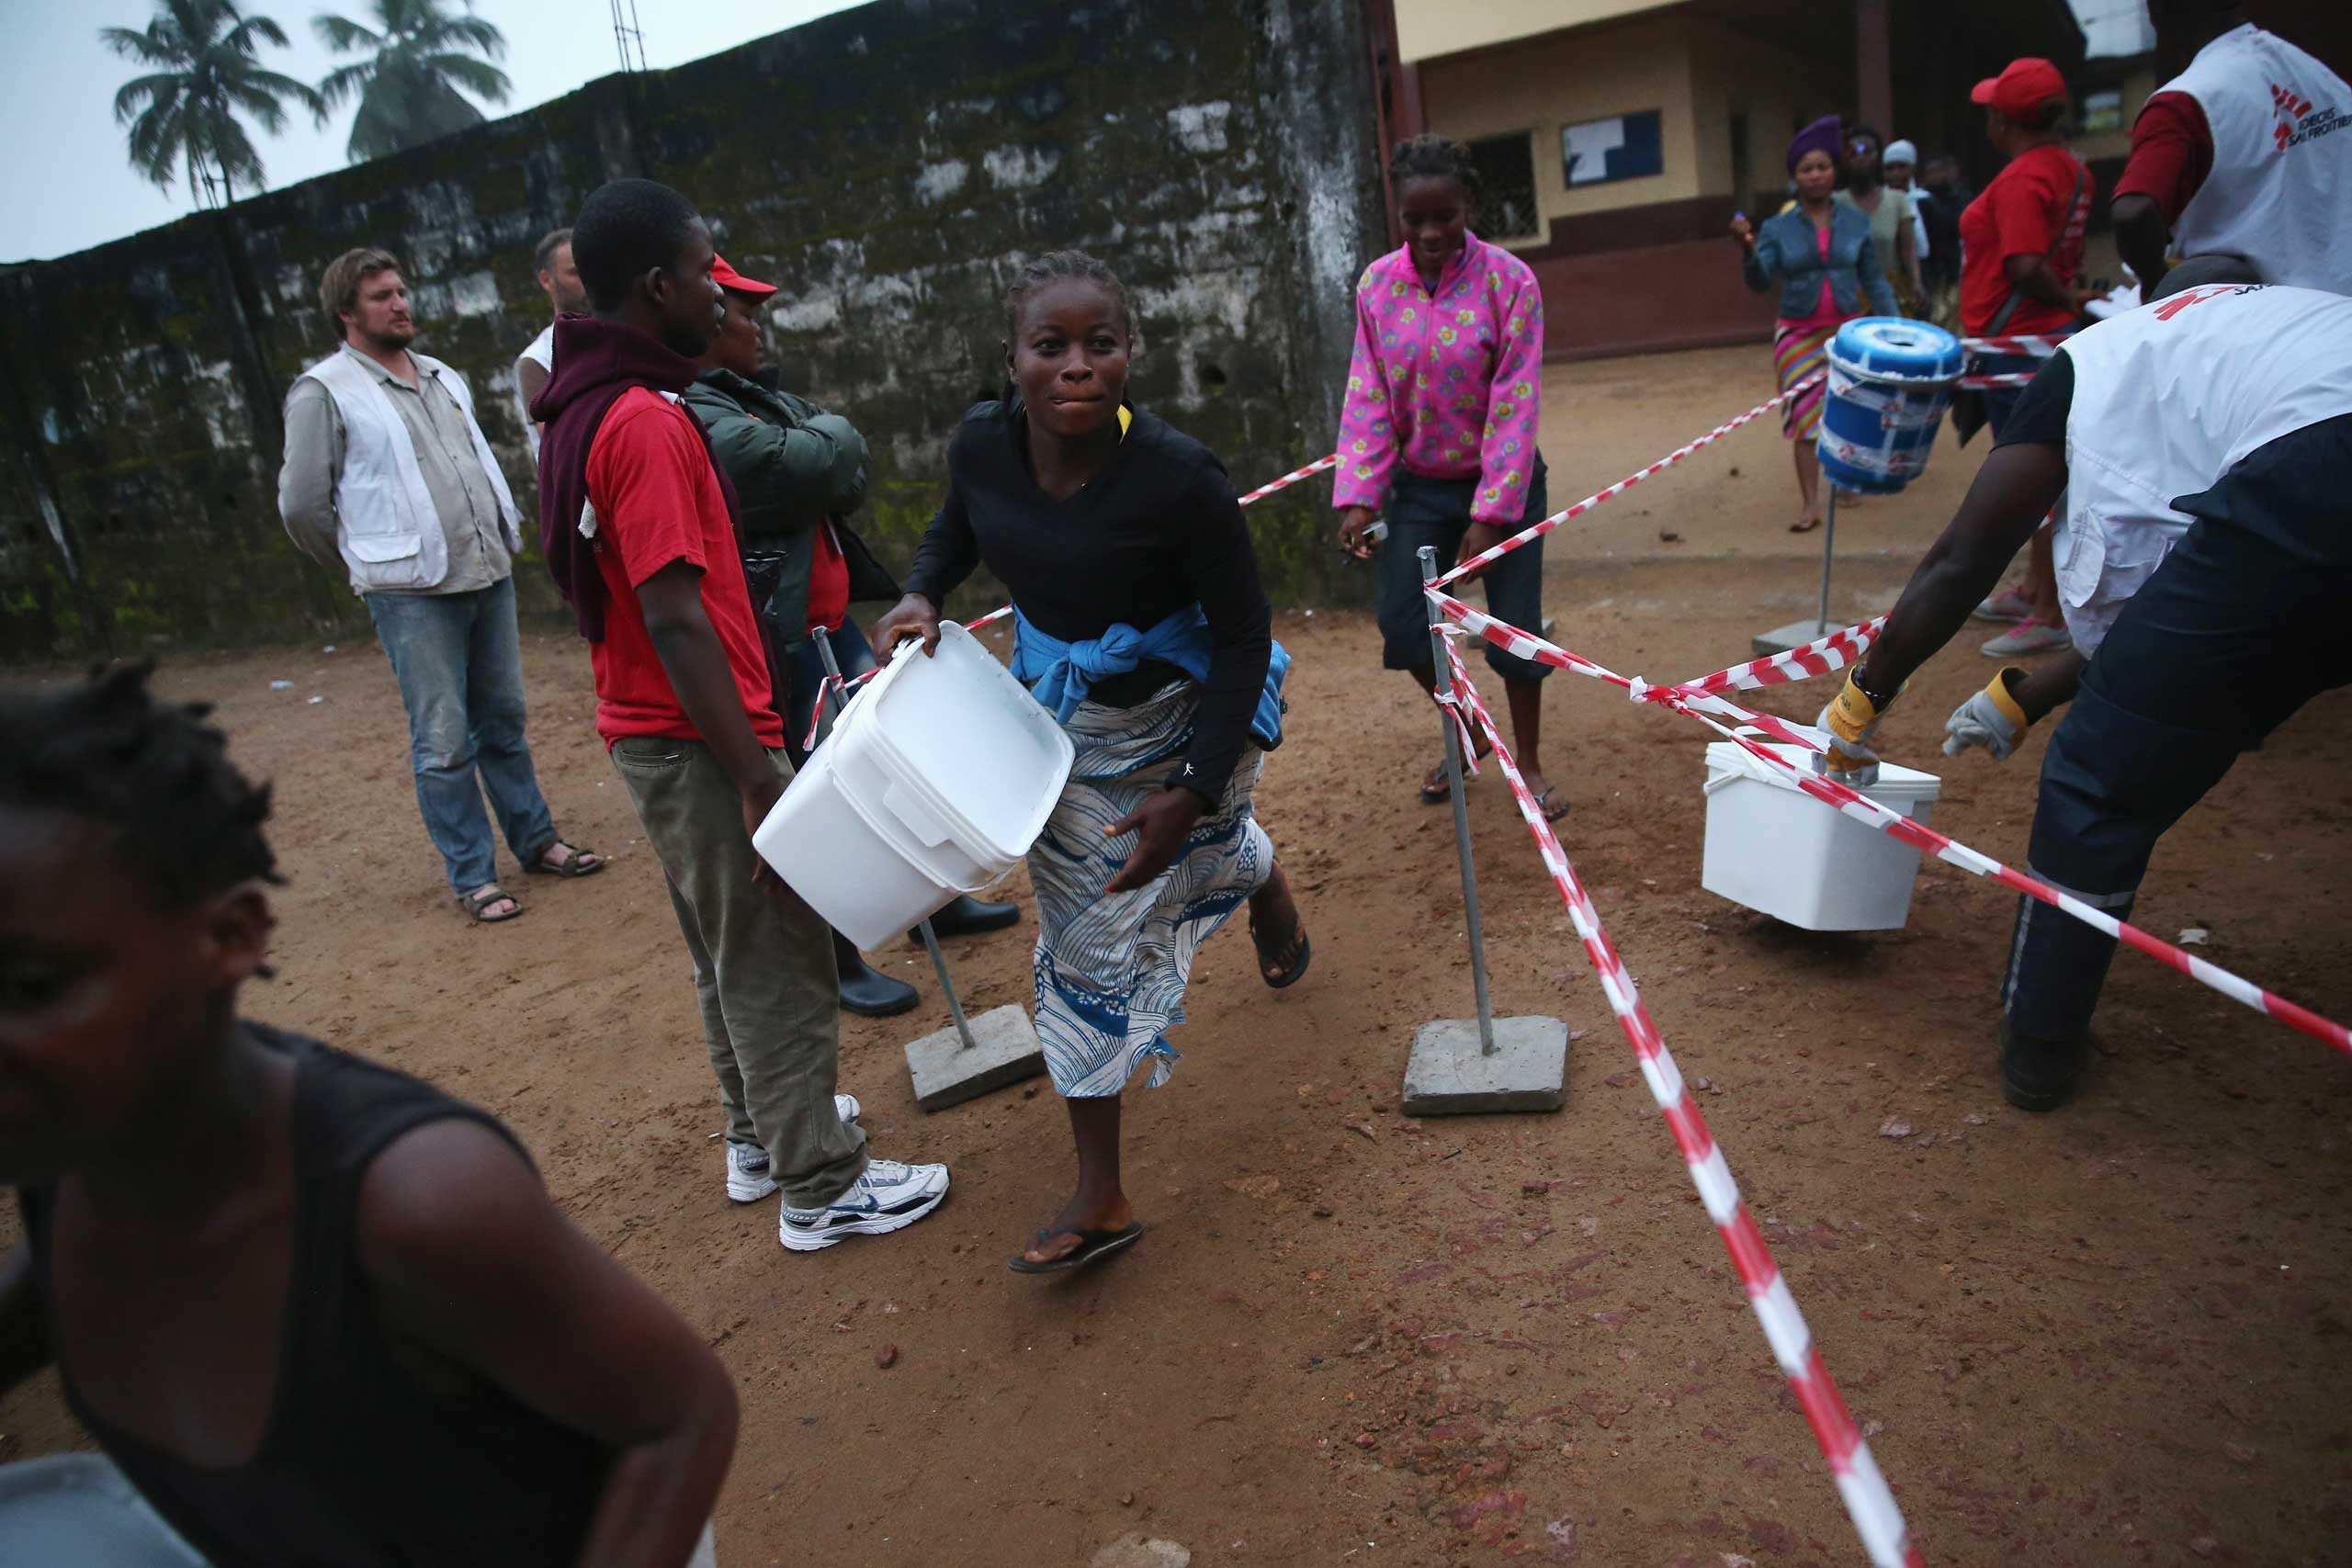 Residents take home family and home disinfection kits distributed by Doctors Without Borders, on Oct. 4, 2014 in New Kru Town, Liberia. (John Moore—Getty Images)